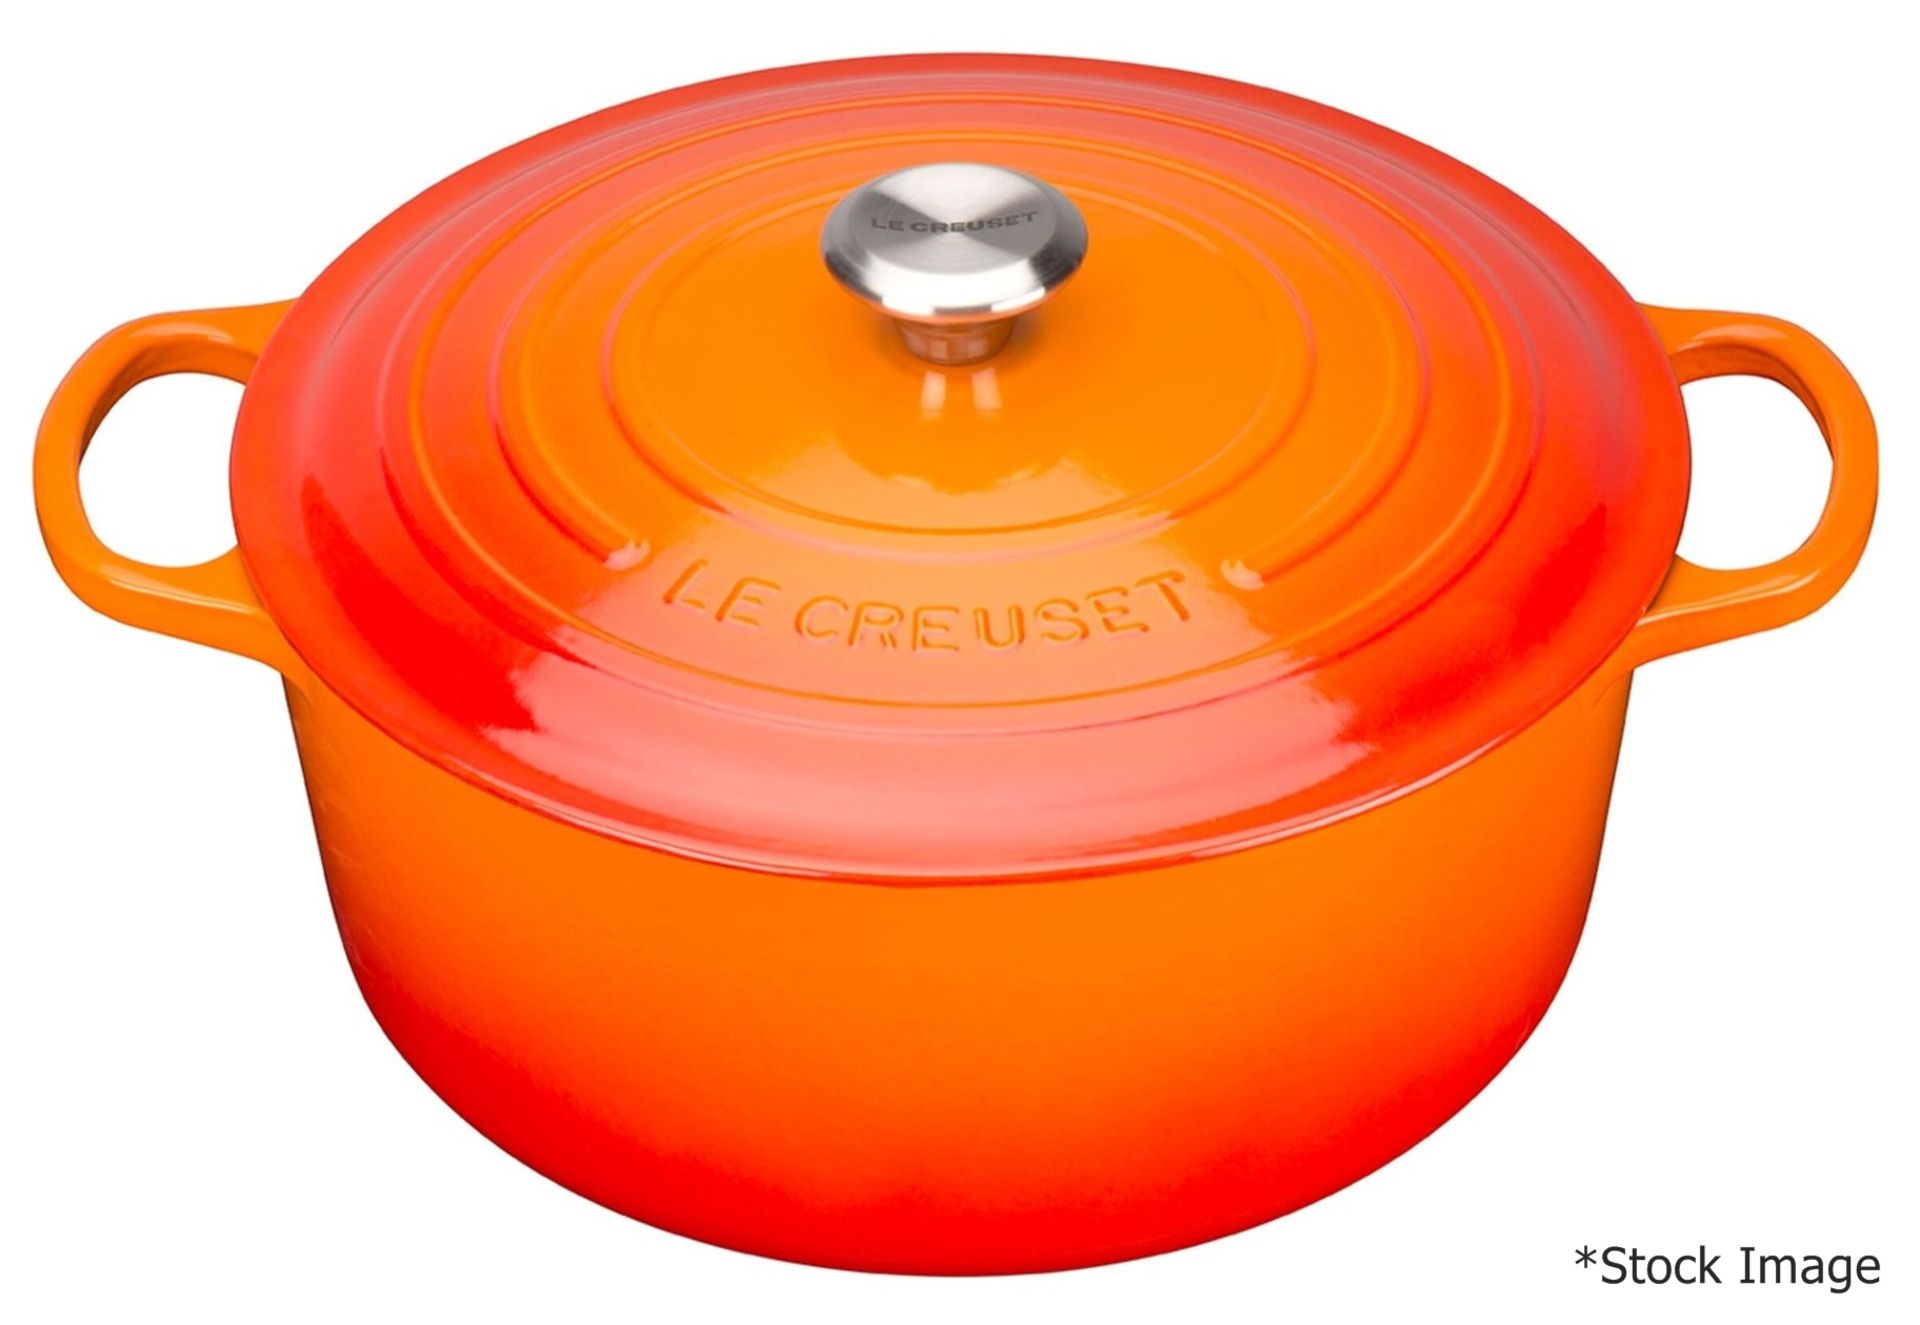 1 x LE CREUSET 'Volcanic' Enamelled Cast Iron Round Casserole Dish With Lid (30cm) - RRP £355.00 - Image 9 of 13